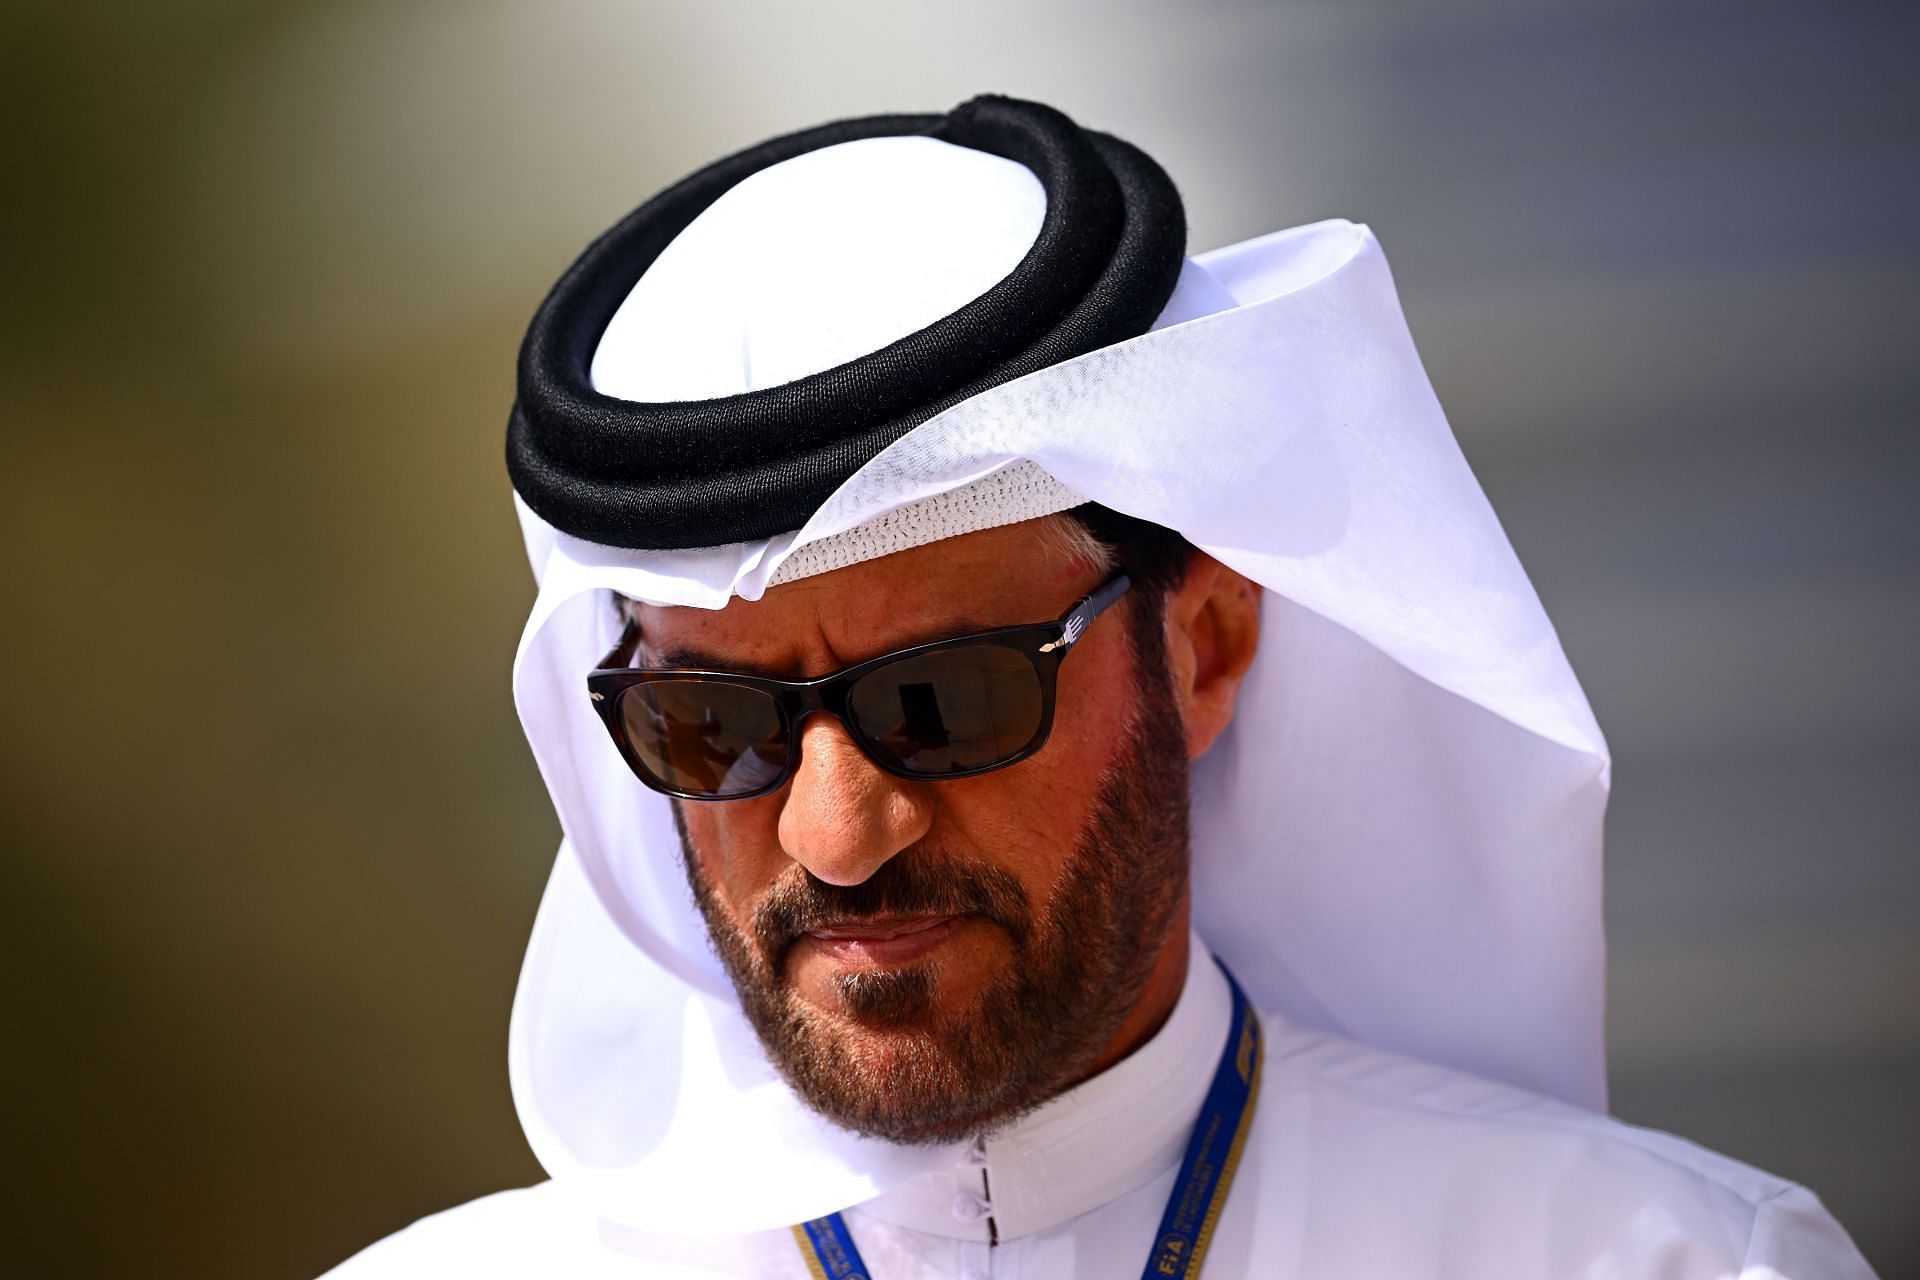 Mohammed ben Sulayem, FIA President, walks in the Paddock before the F1 Grand Prix of Bahrain at Bahrain International Circuit on March 20, 2022 in Bahrain, Bahrain. (Photo by Clive Mason/Getty Images)